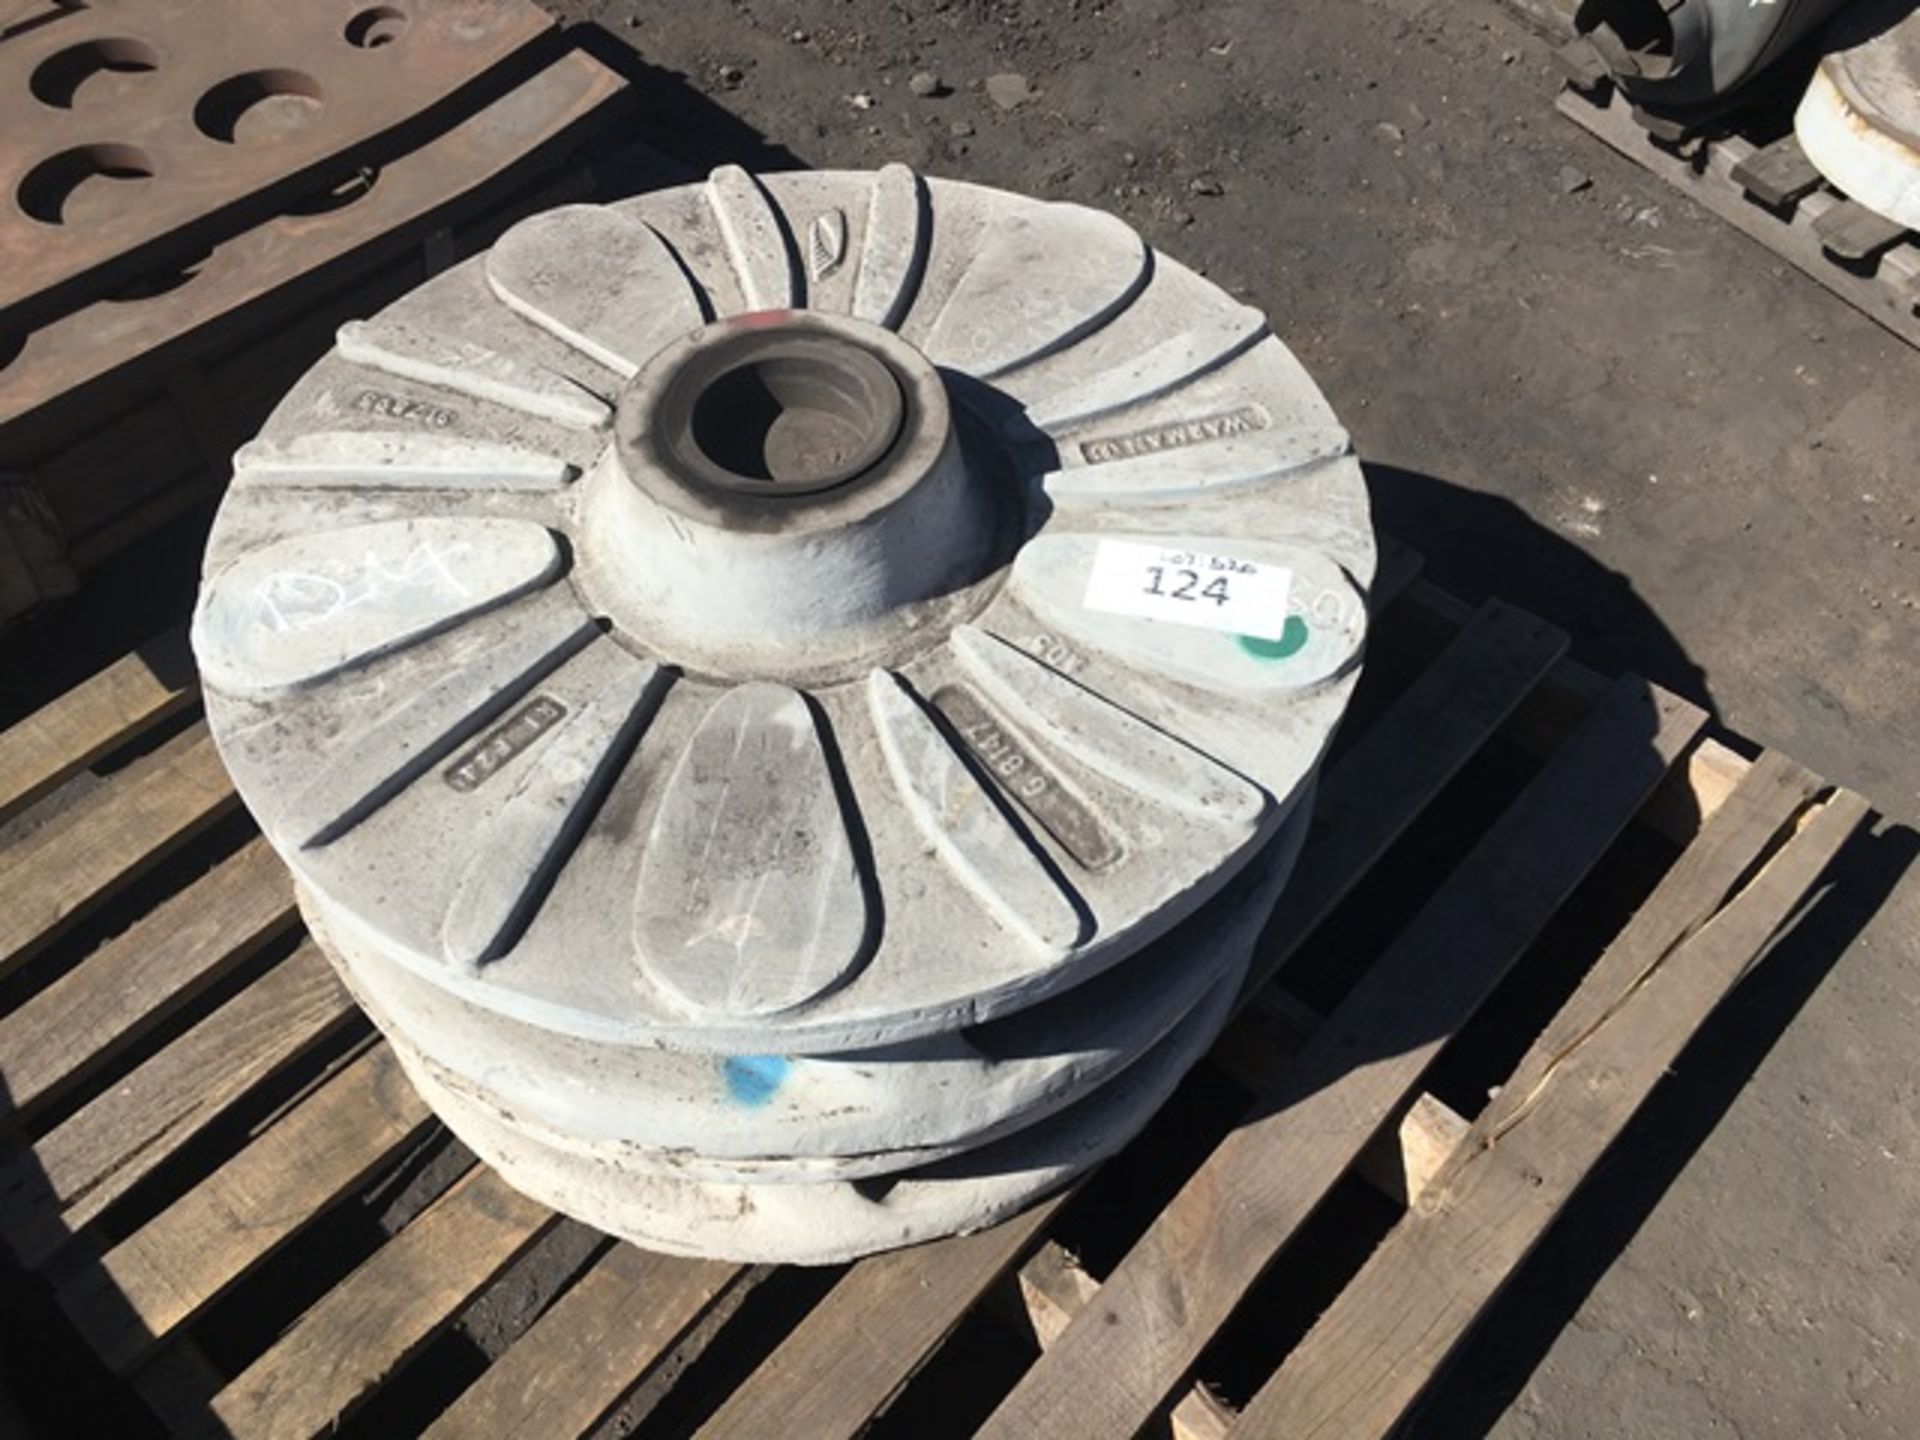 2 X PUMP IMPELLERS - TO BE SOLD AS ONE LOT (LOCATED IN MIDDELBURG, MPUMALANGA)